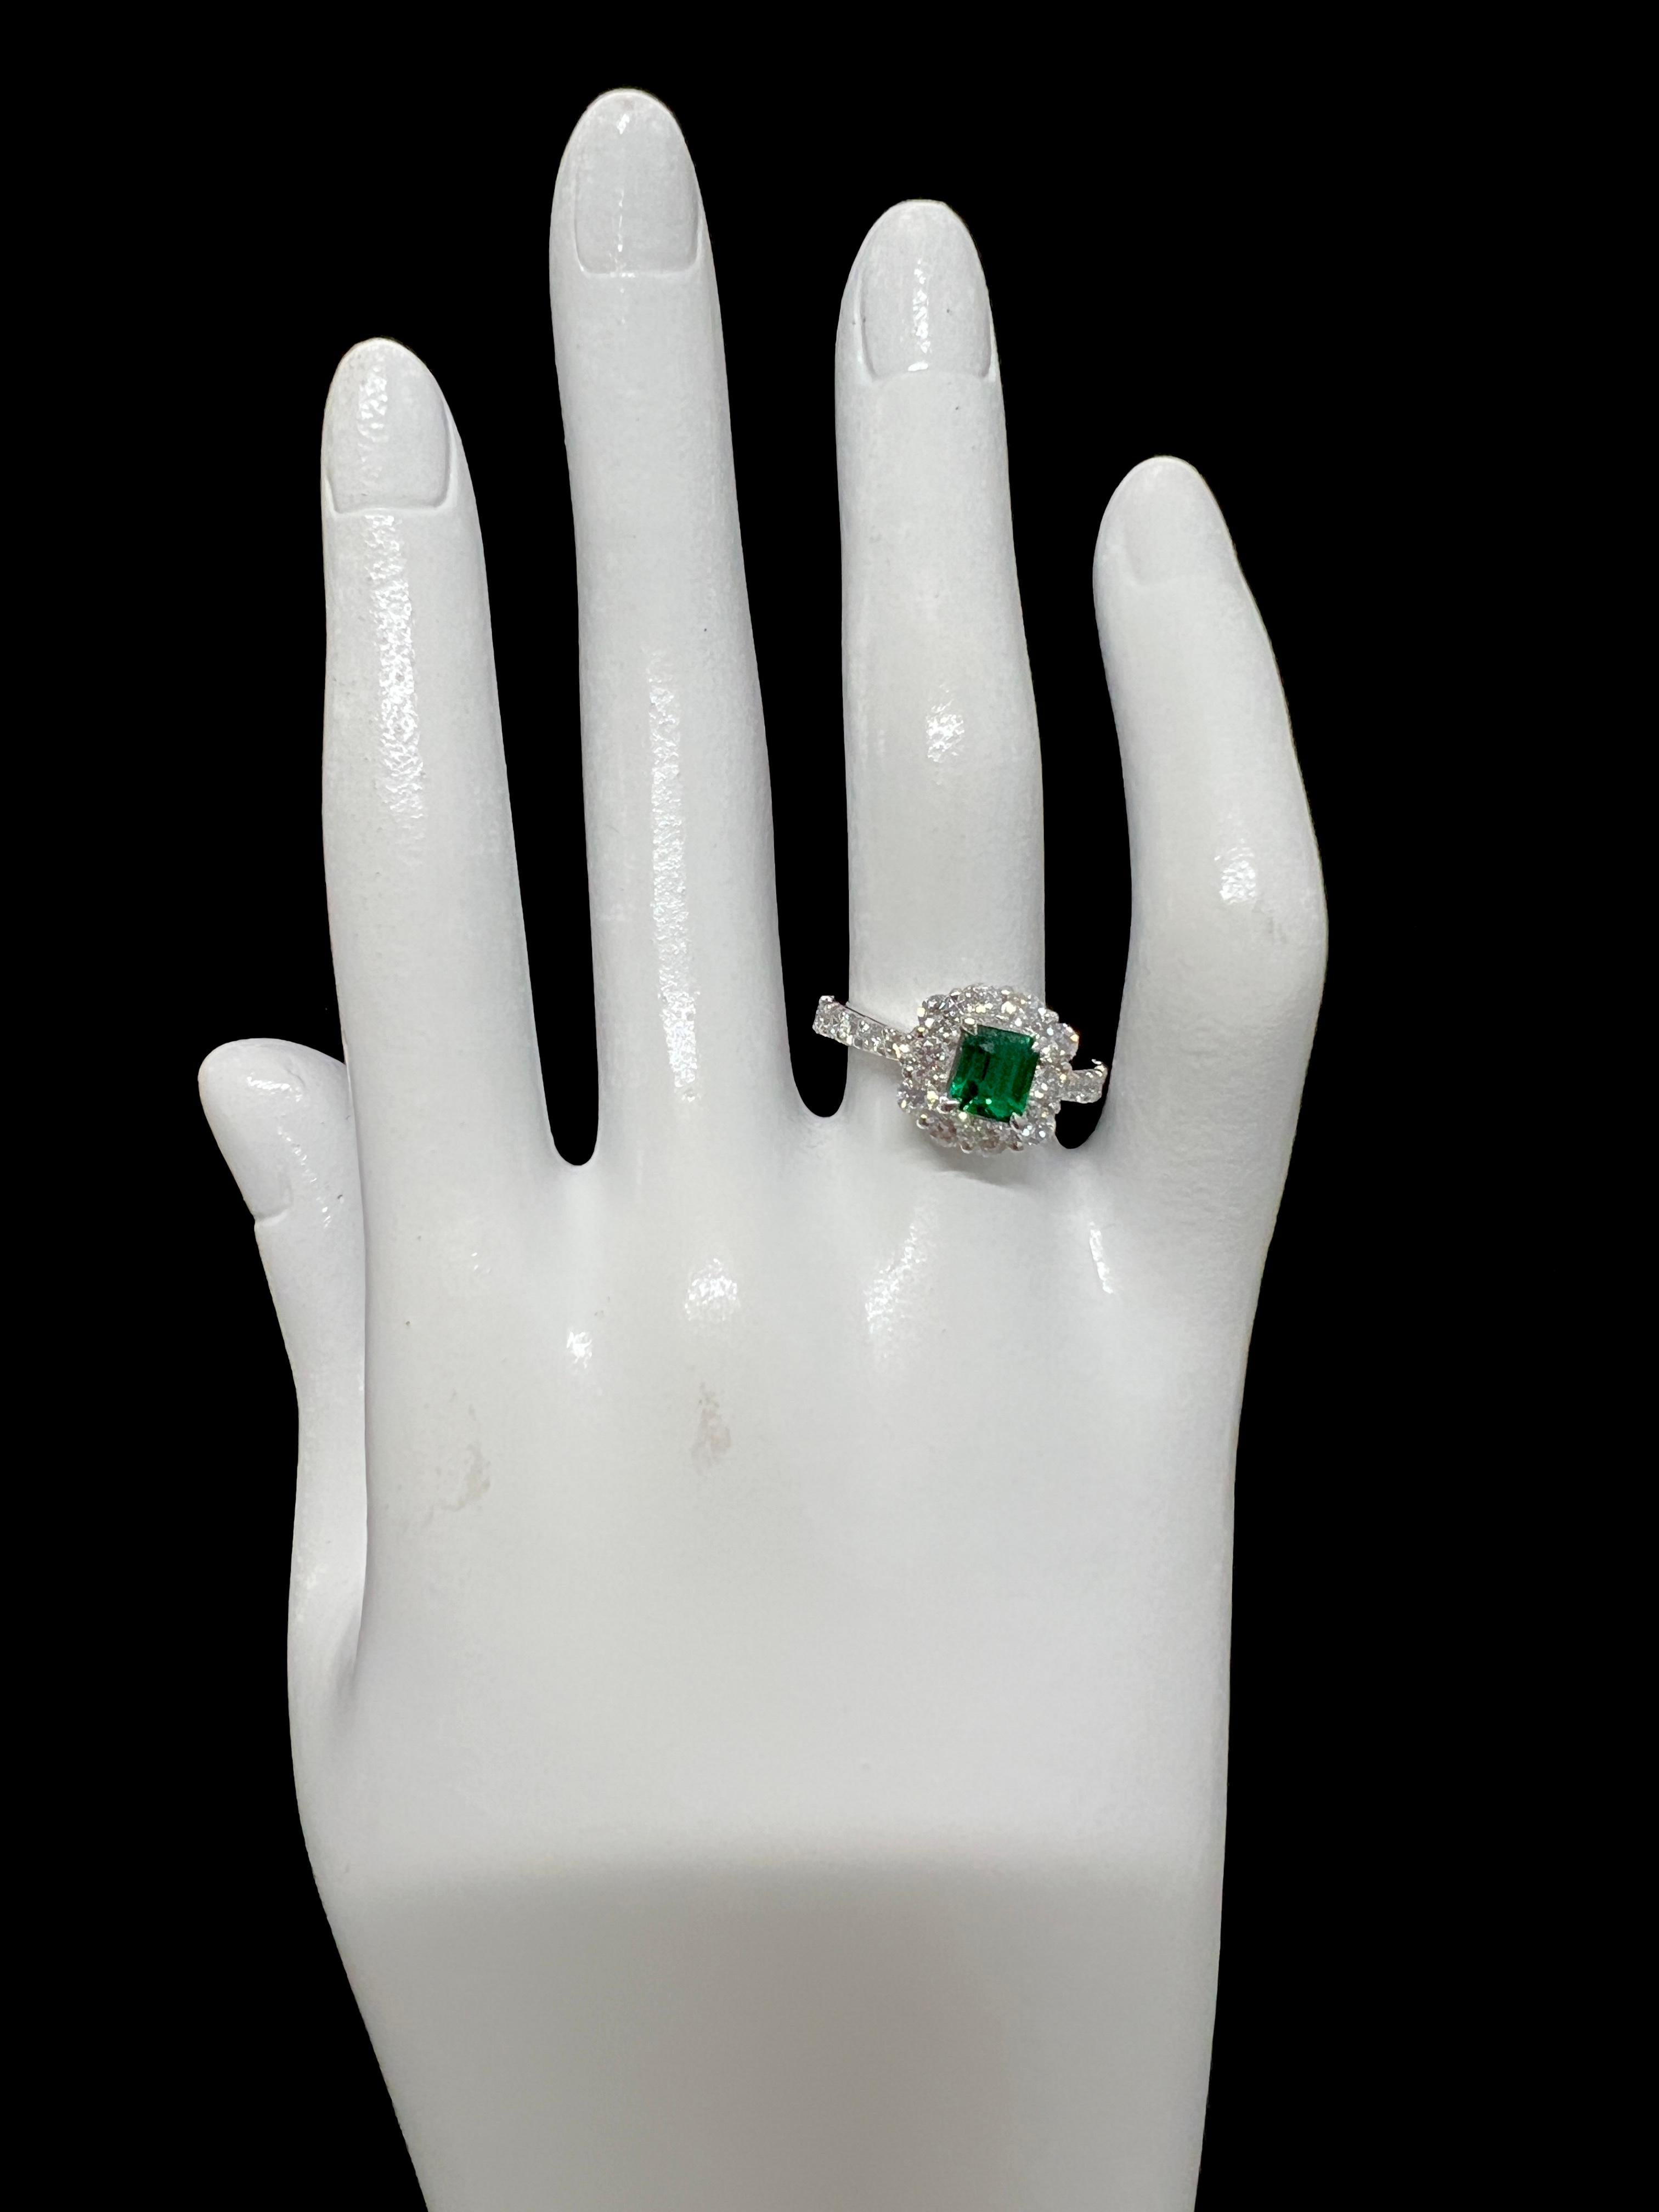 0.89 Carat Vivid Green Emerald and Diamond Halo Ring Set in Platinum For Sale 1